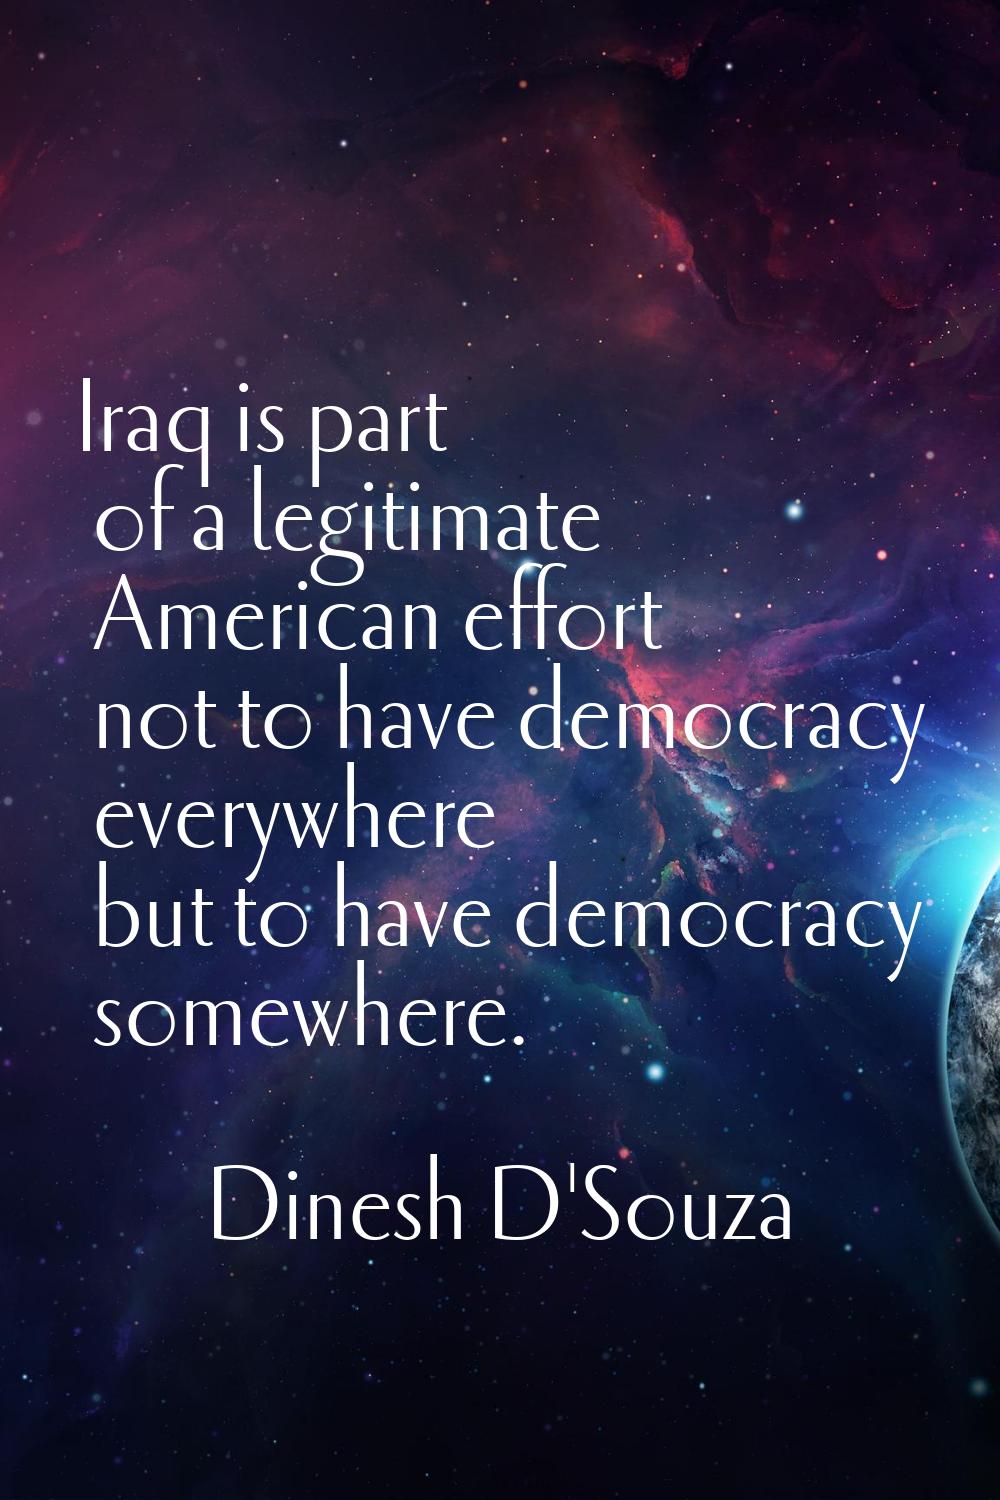 Iraq is part of a legitimate American effort not to have democracy everywhere but to have democracy